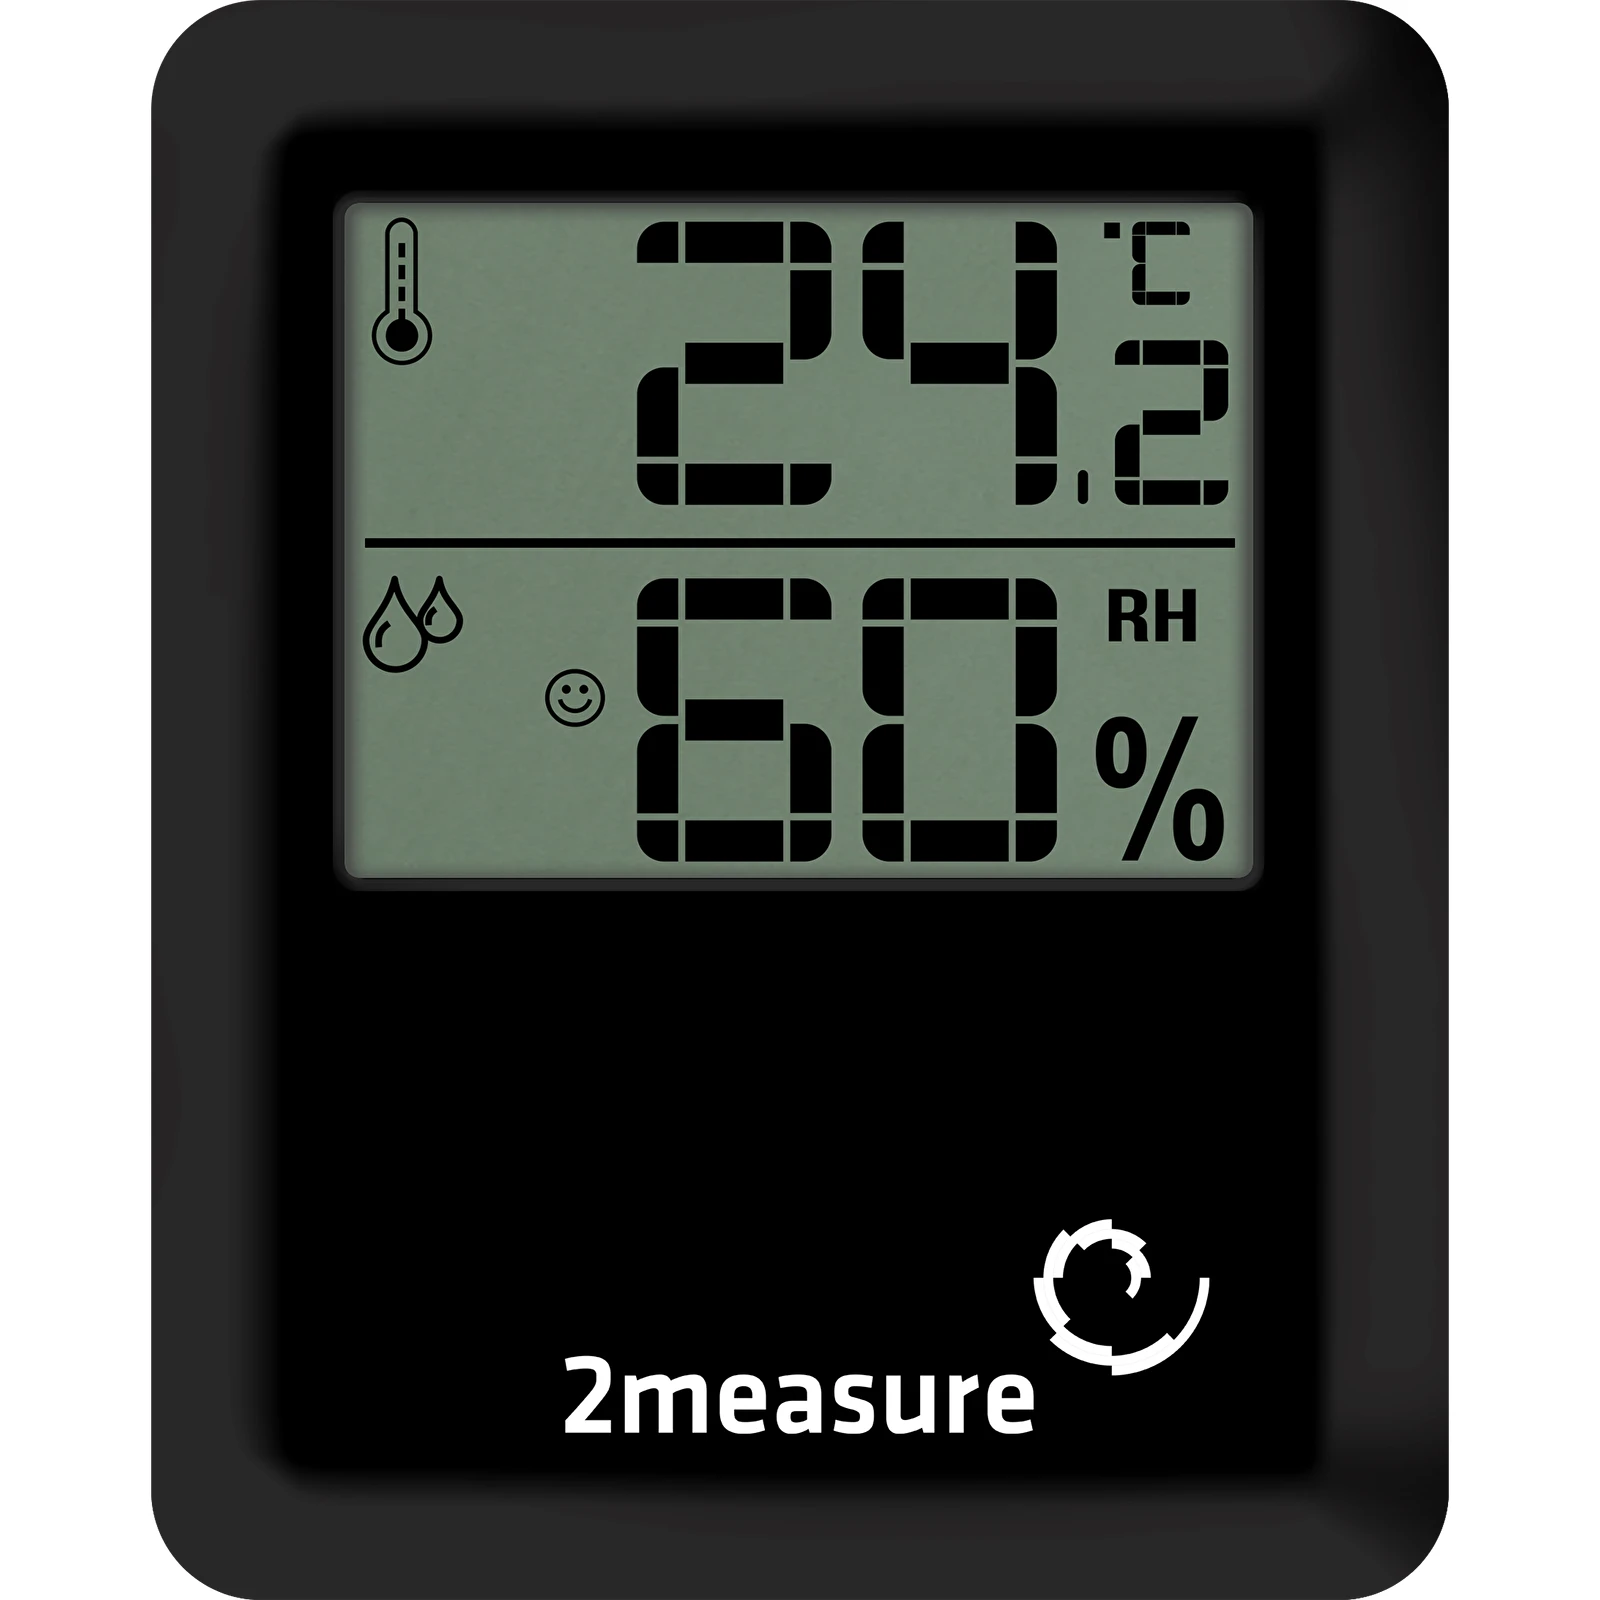 https://browin.com/static/images/1600/weather-station-electronic-thermometer-hygrometer-170606_.webp